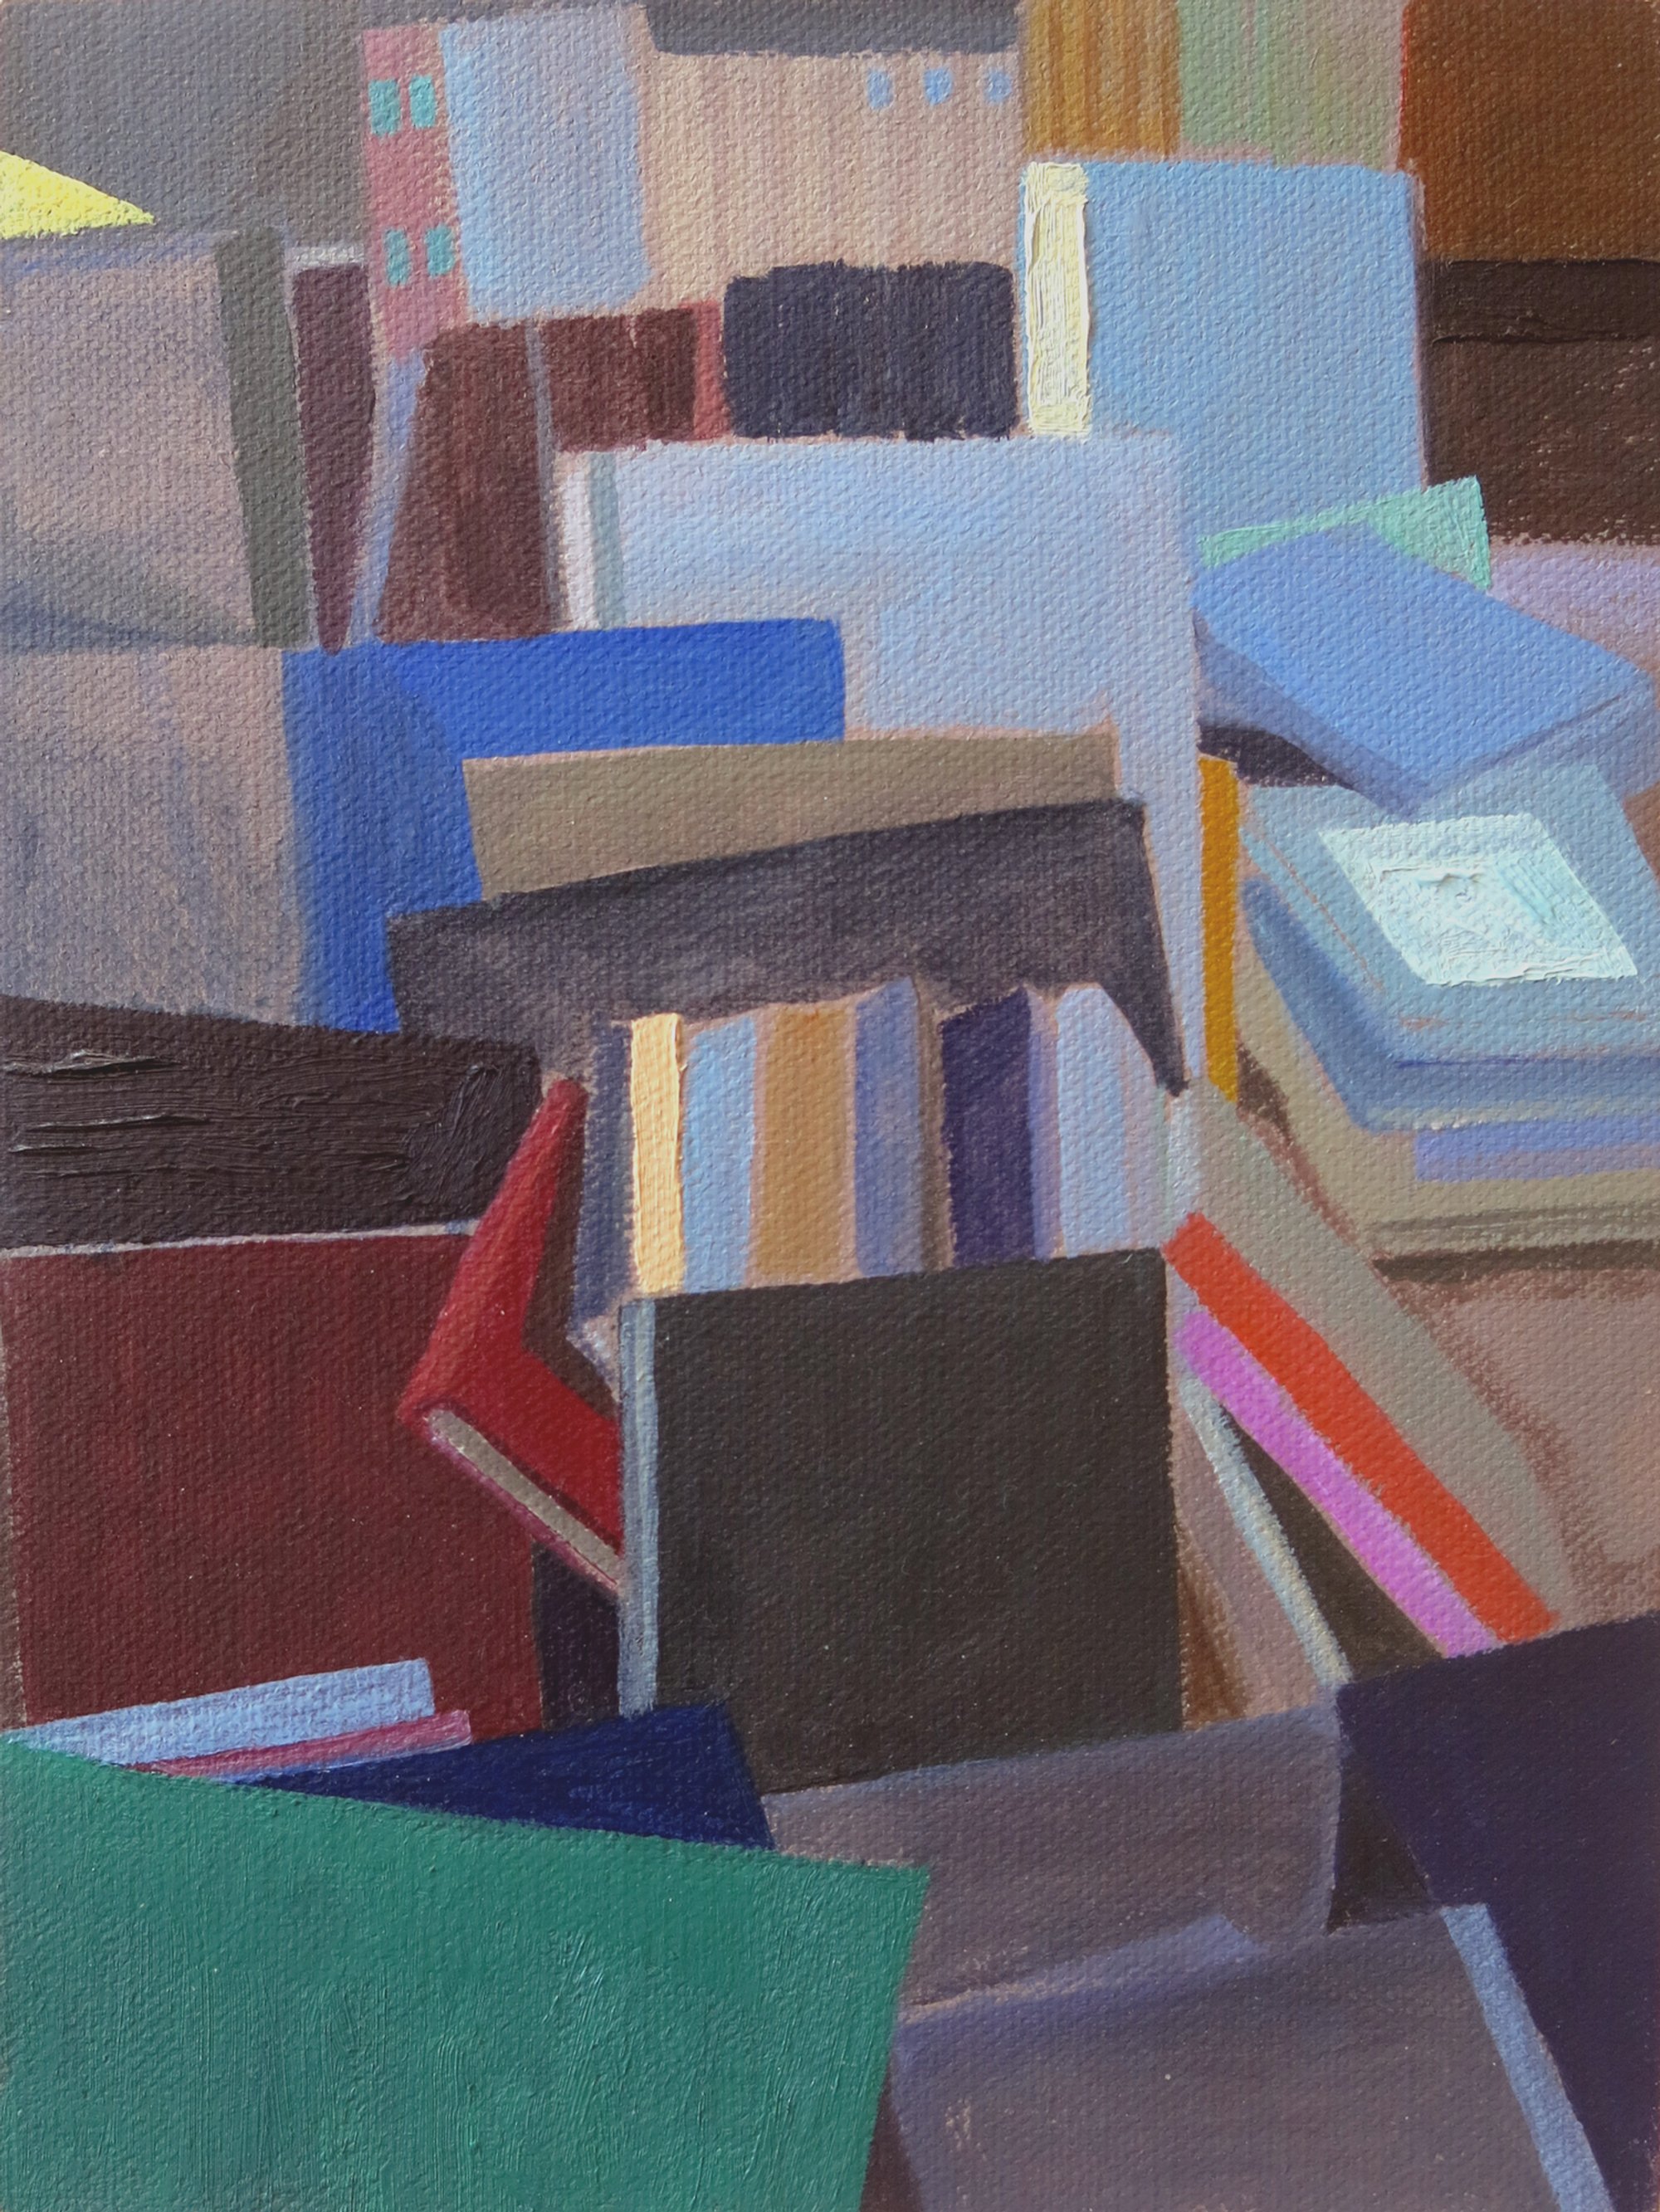   Book Stall    2023, oil on canvas board, 24 x 18cm  